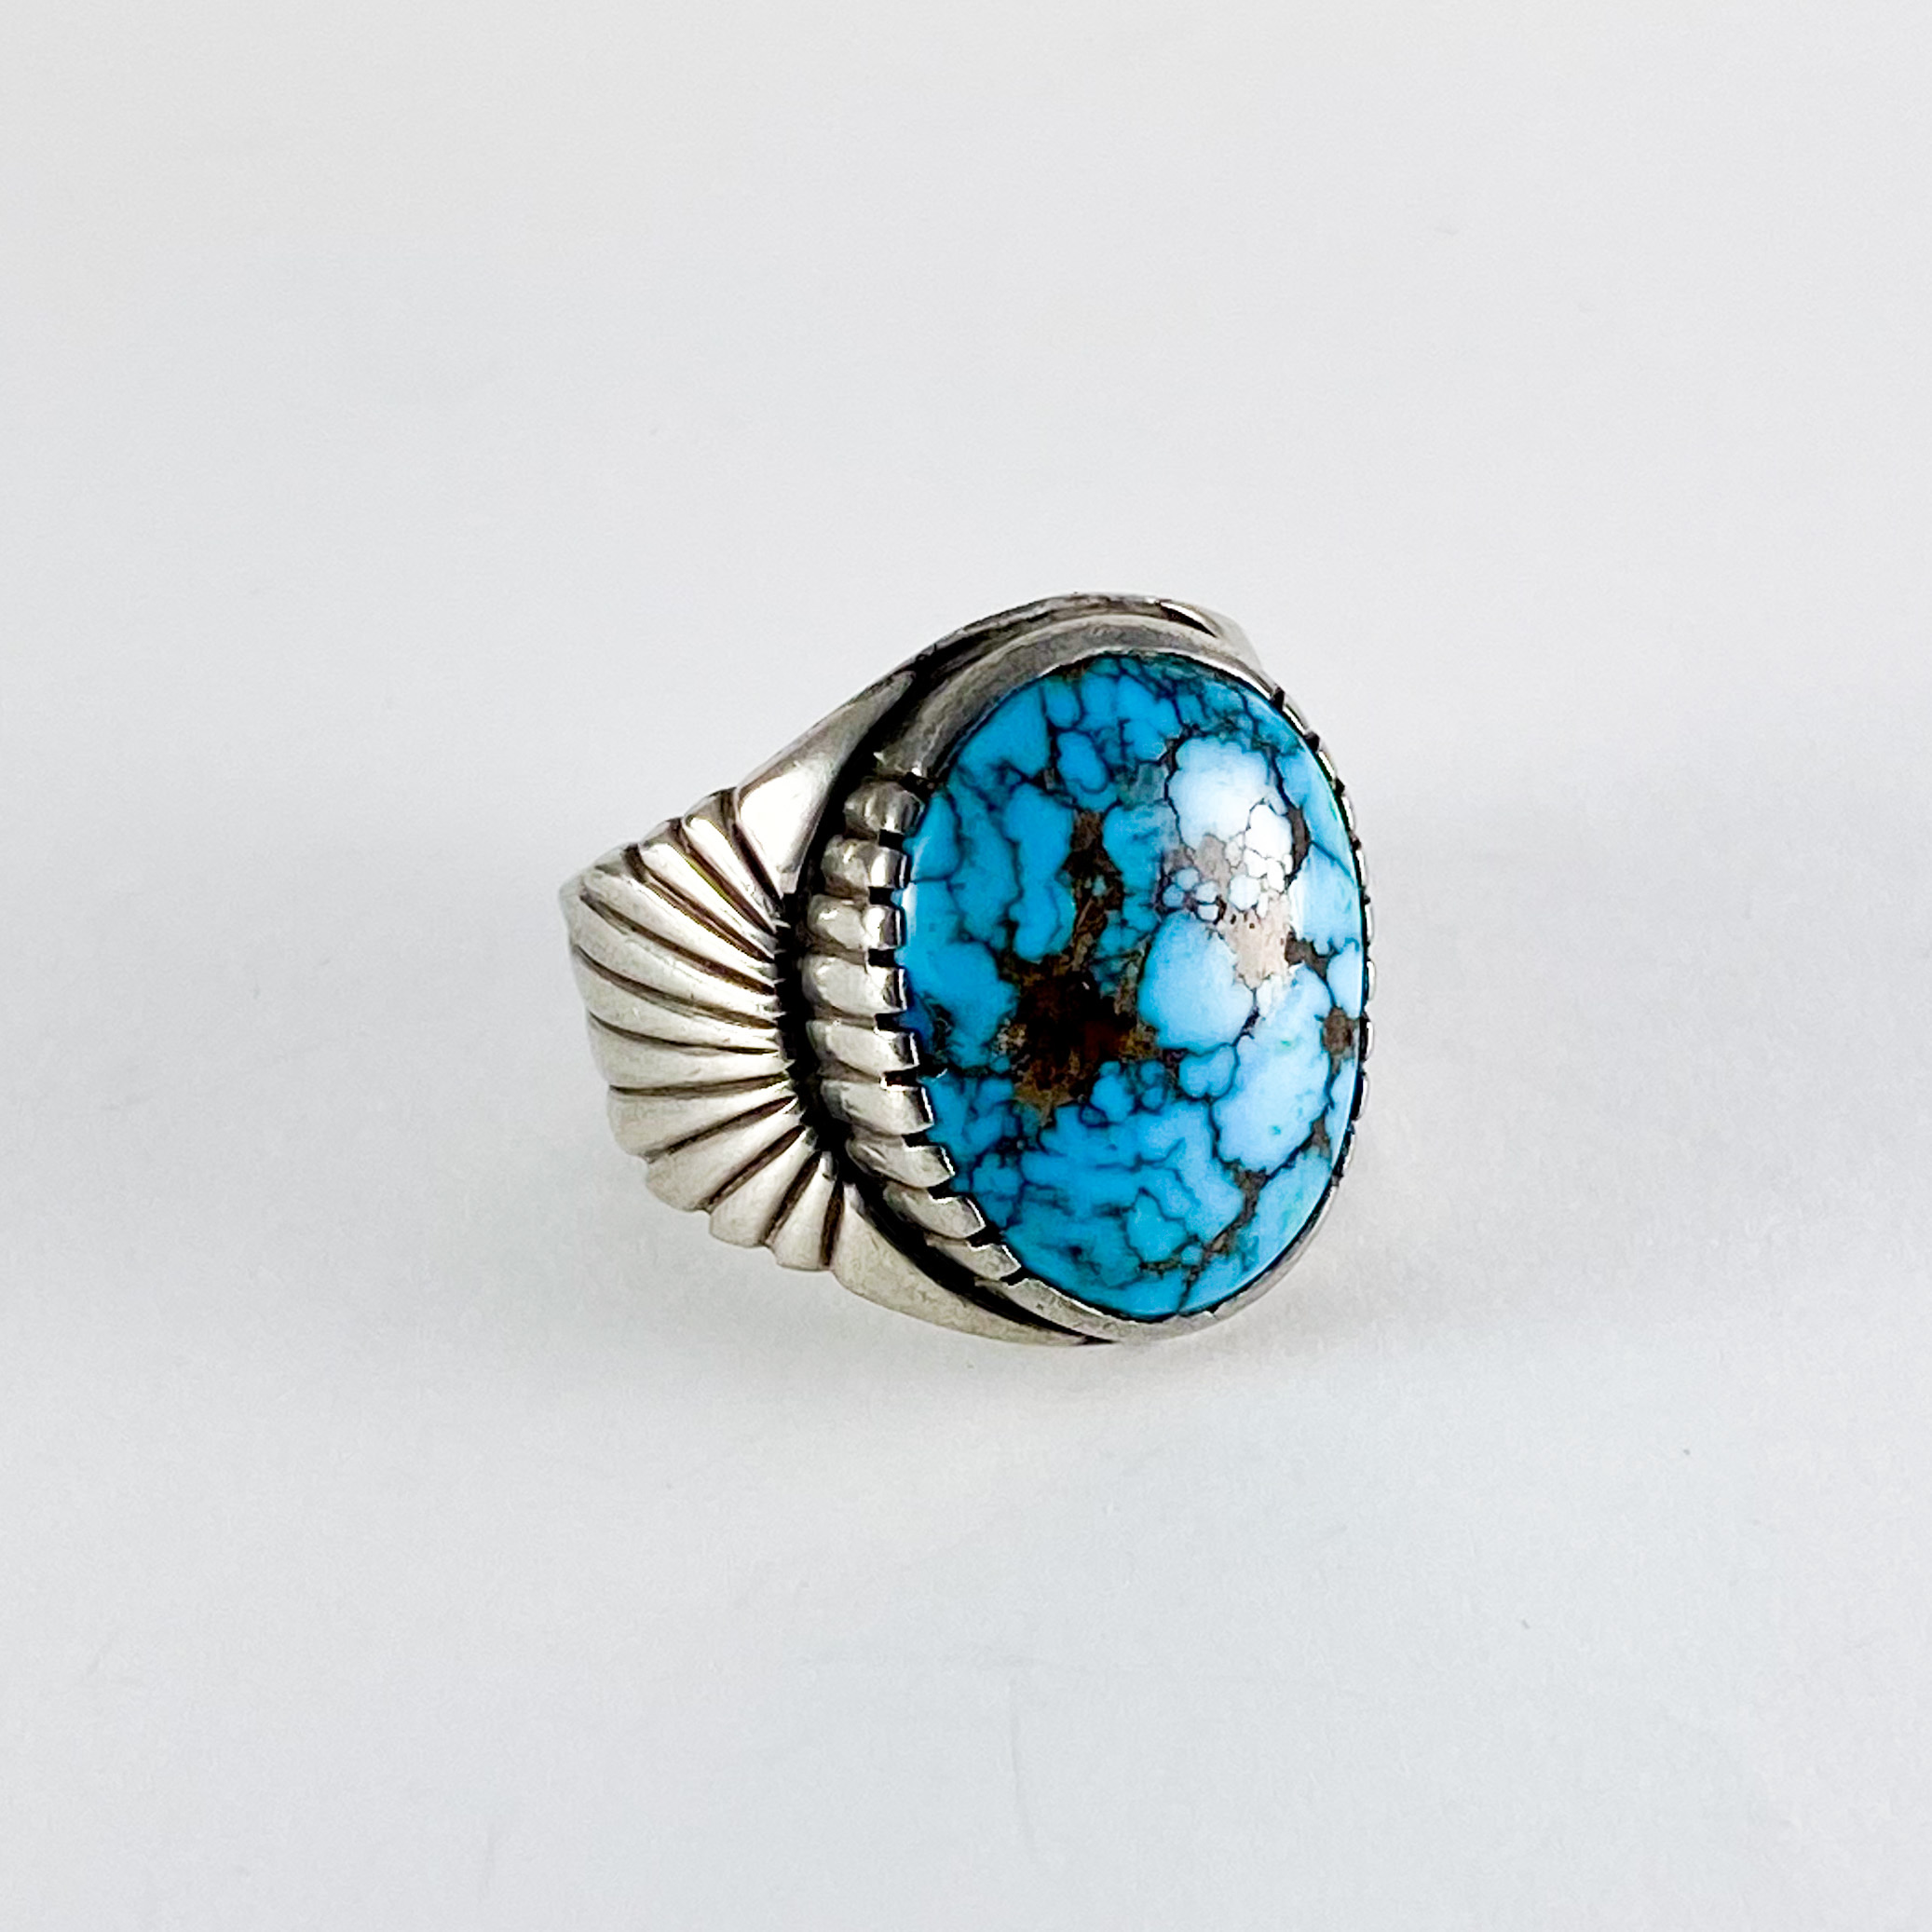 Lee Yazzie Nevada Blue turquoise ring 459 | ターコイズ・メンズ